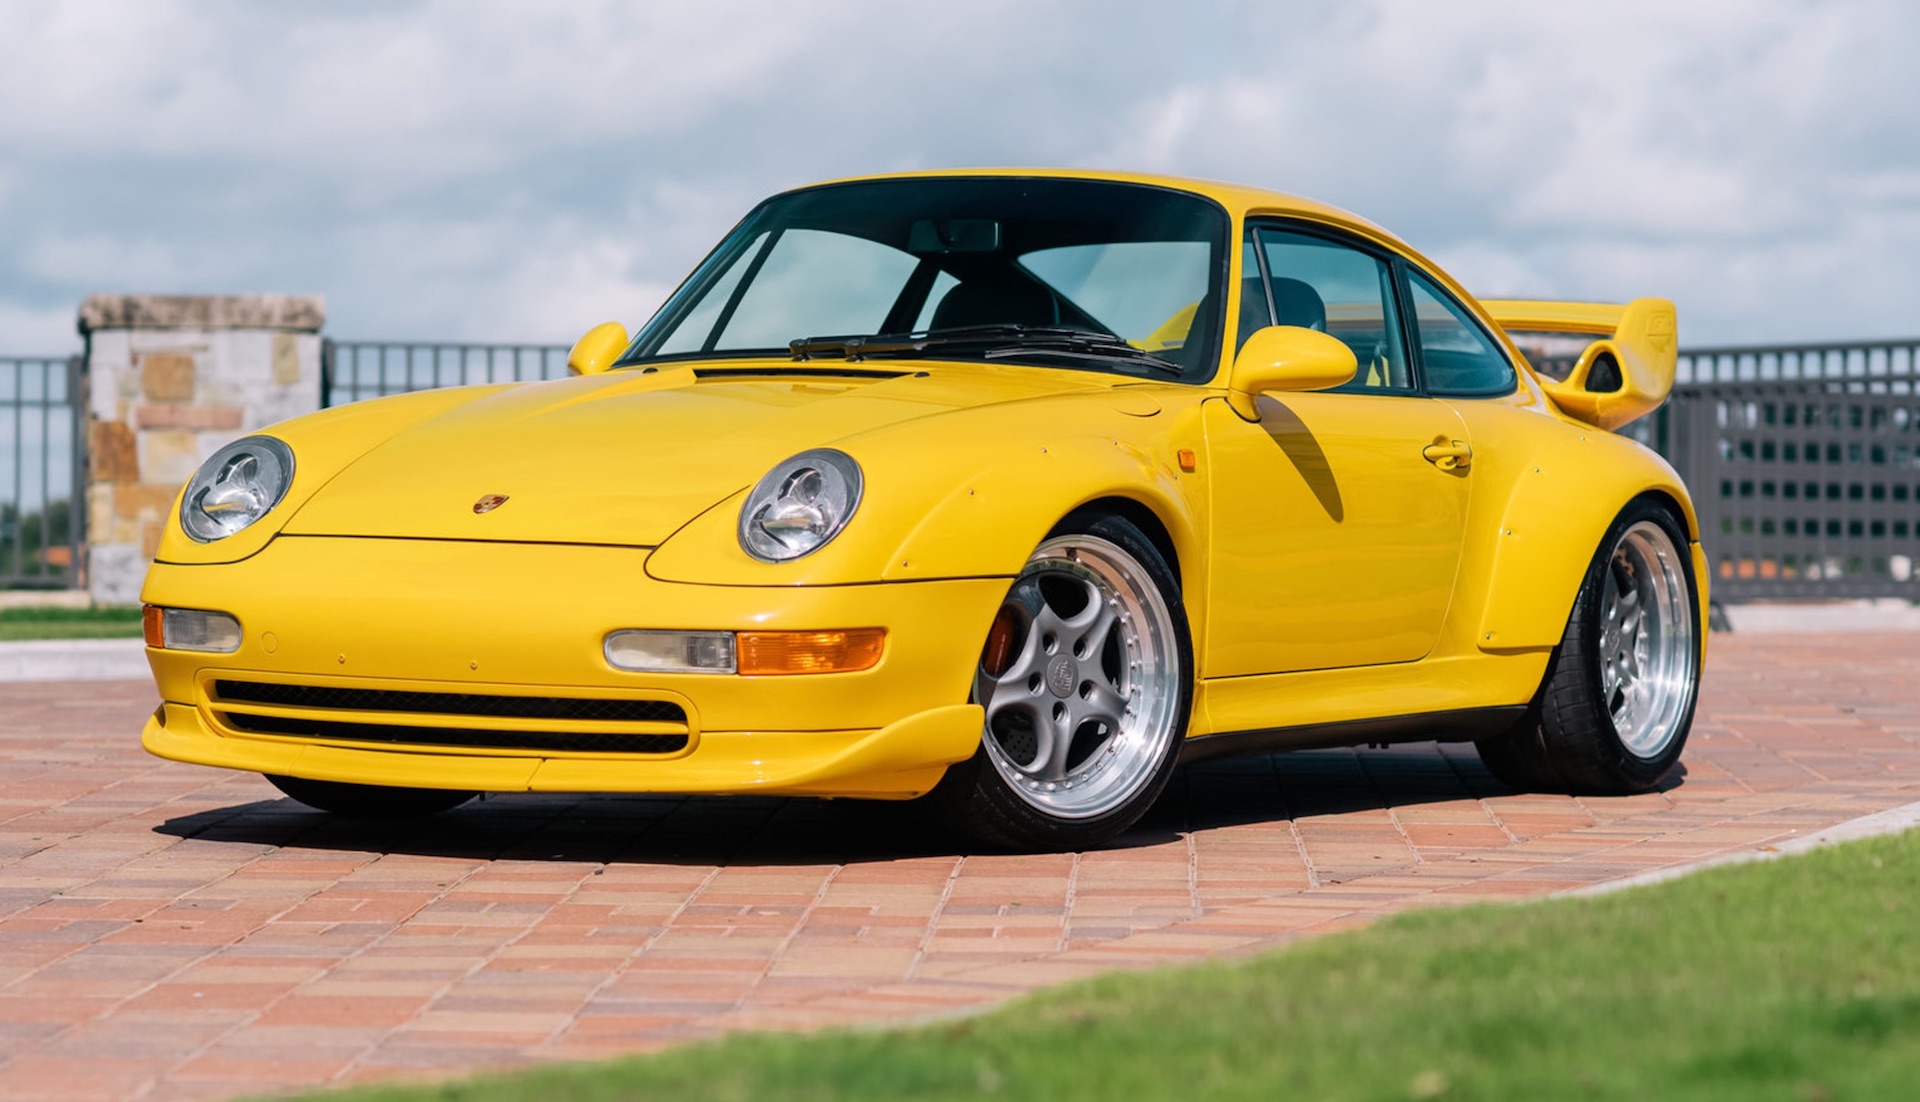 A 1996 Porsche 911 GT2 to be auctioned in MontereyA 1996 Porsche 911 GT2 to be auctioned in Monterey